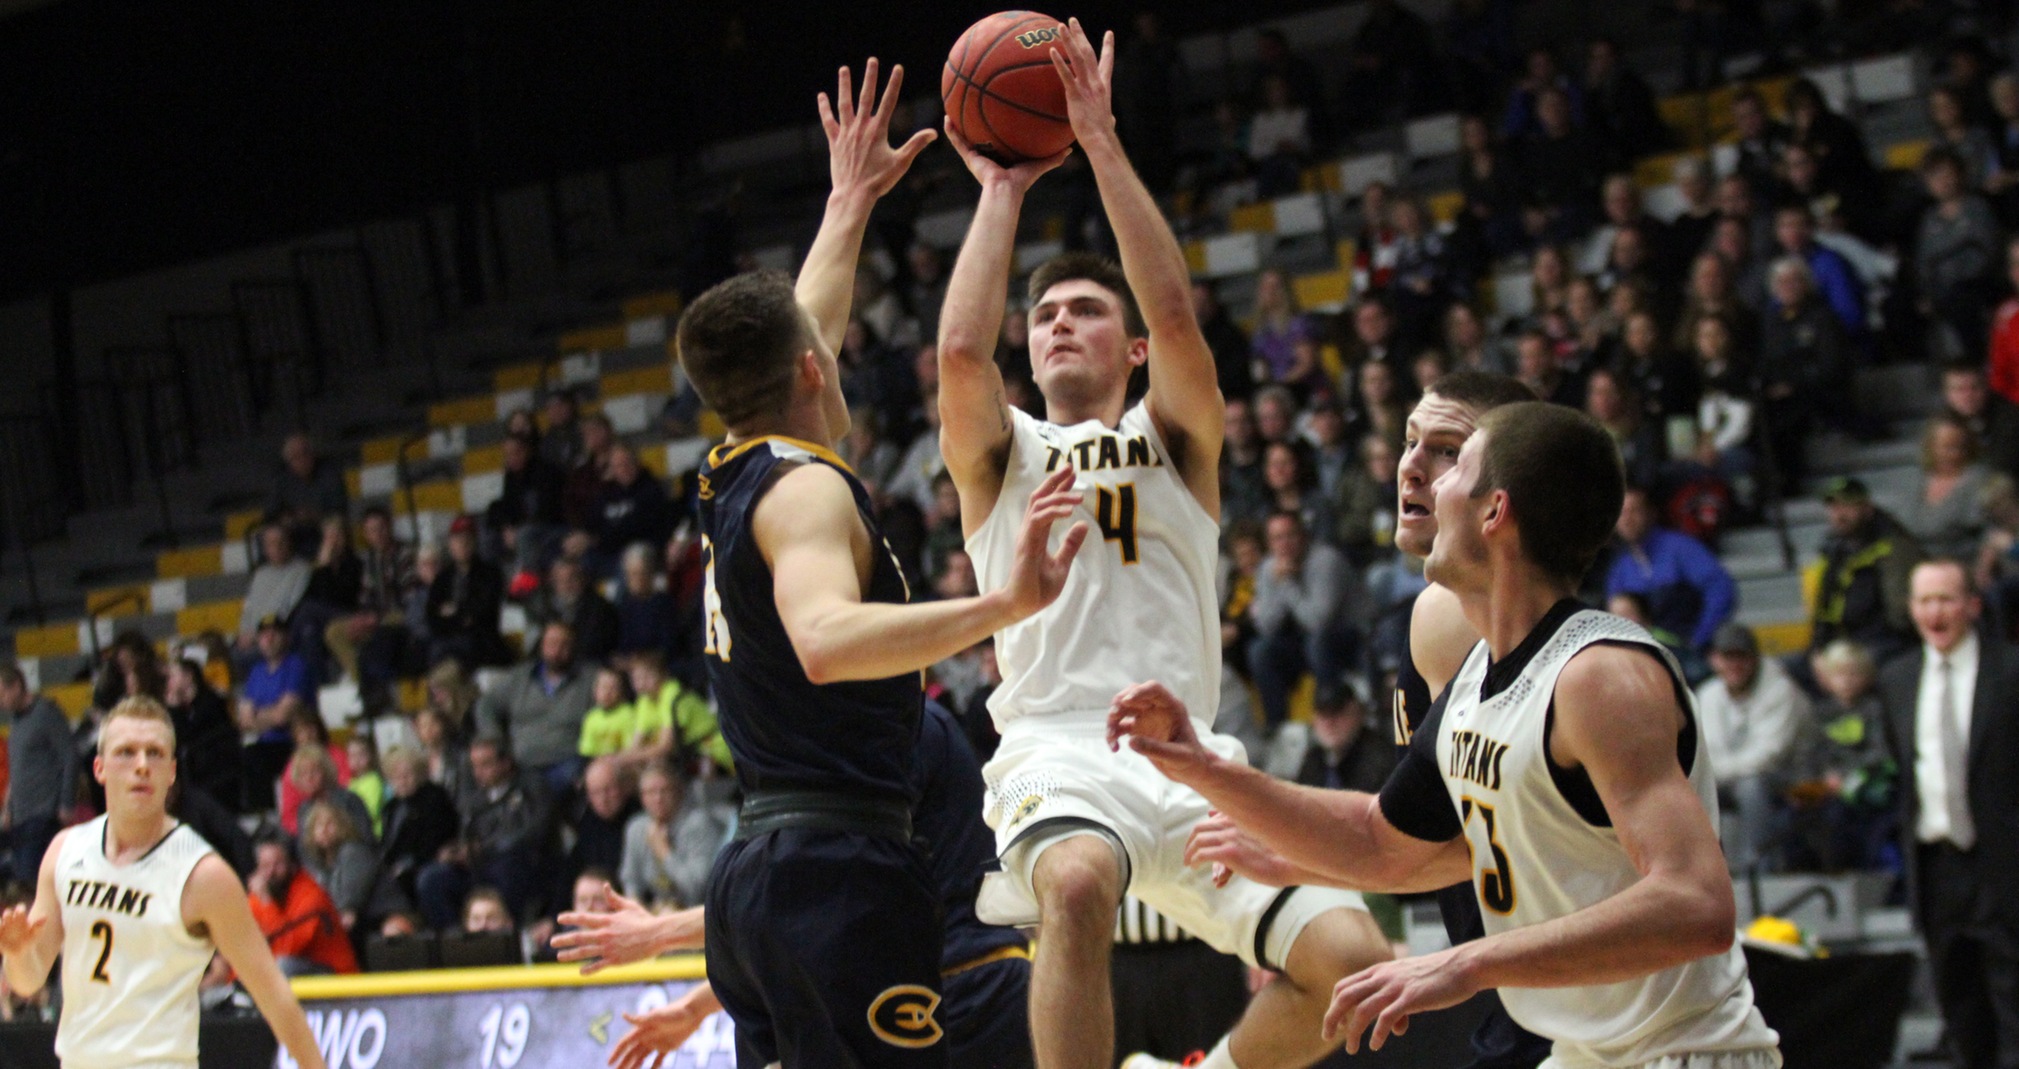 Brett Wittchow's career-high 26 points helped the Titans record a season sweep of the nationally ranked Blugolds.